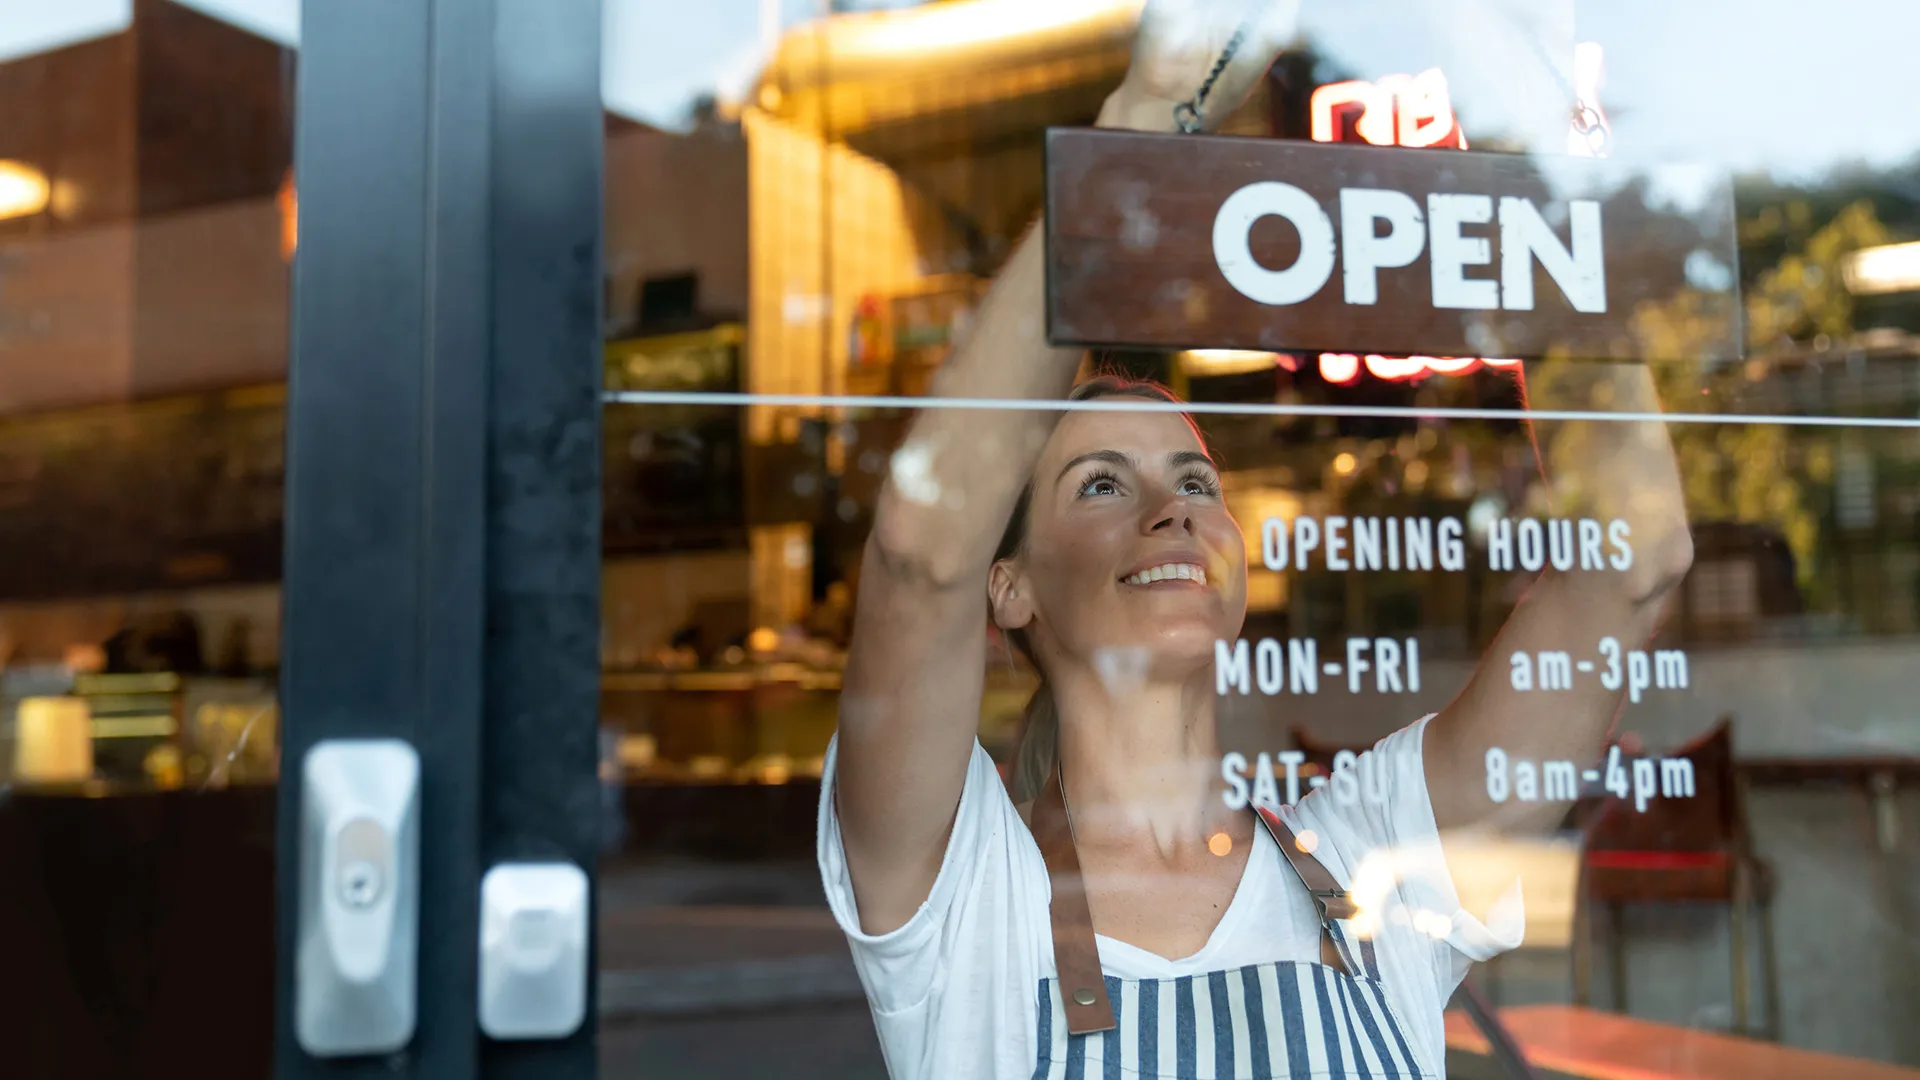 Portrait of a happy business owner hanging an open sign on the door at a cafe and smiling - food and drinks concepts.